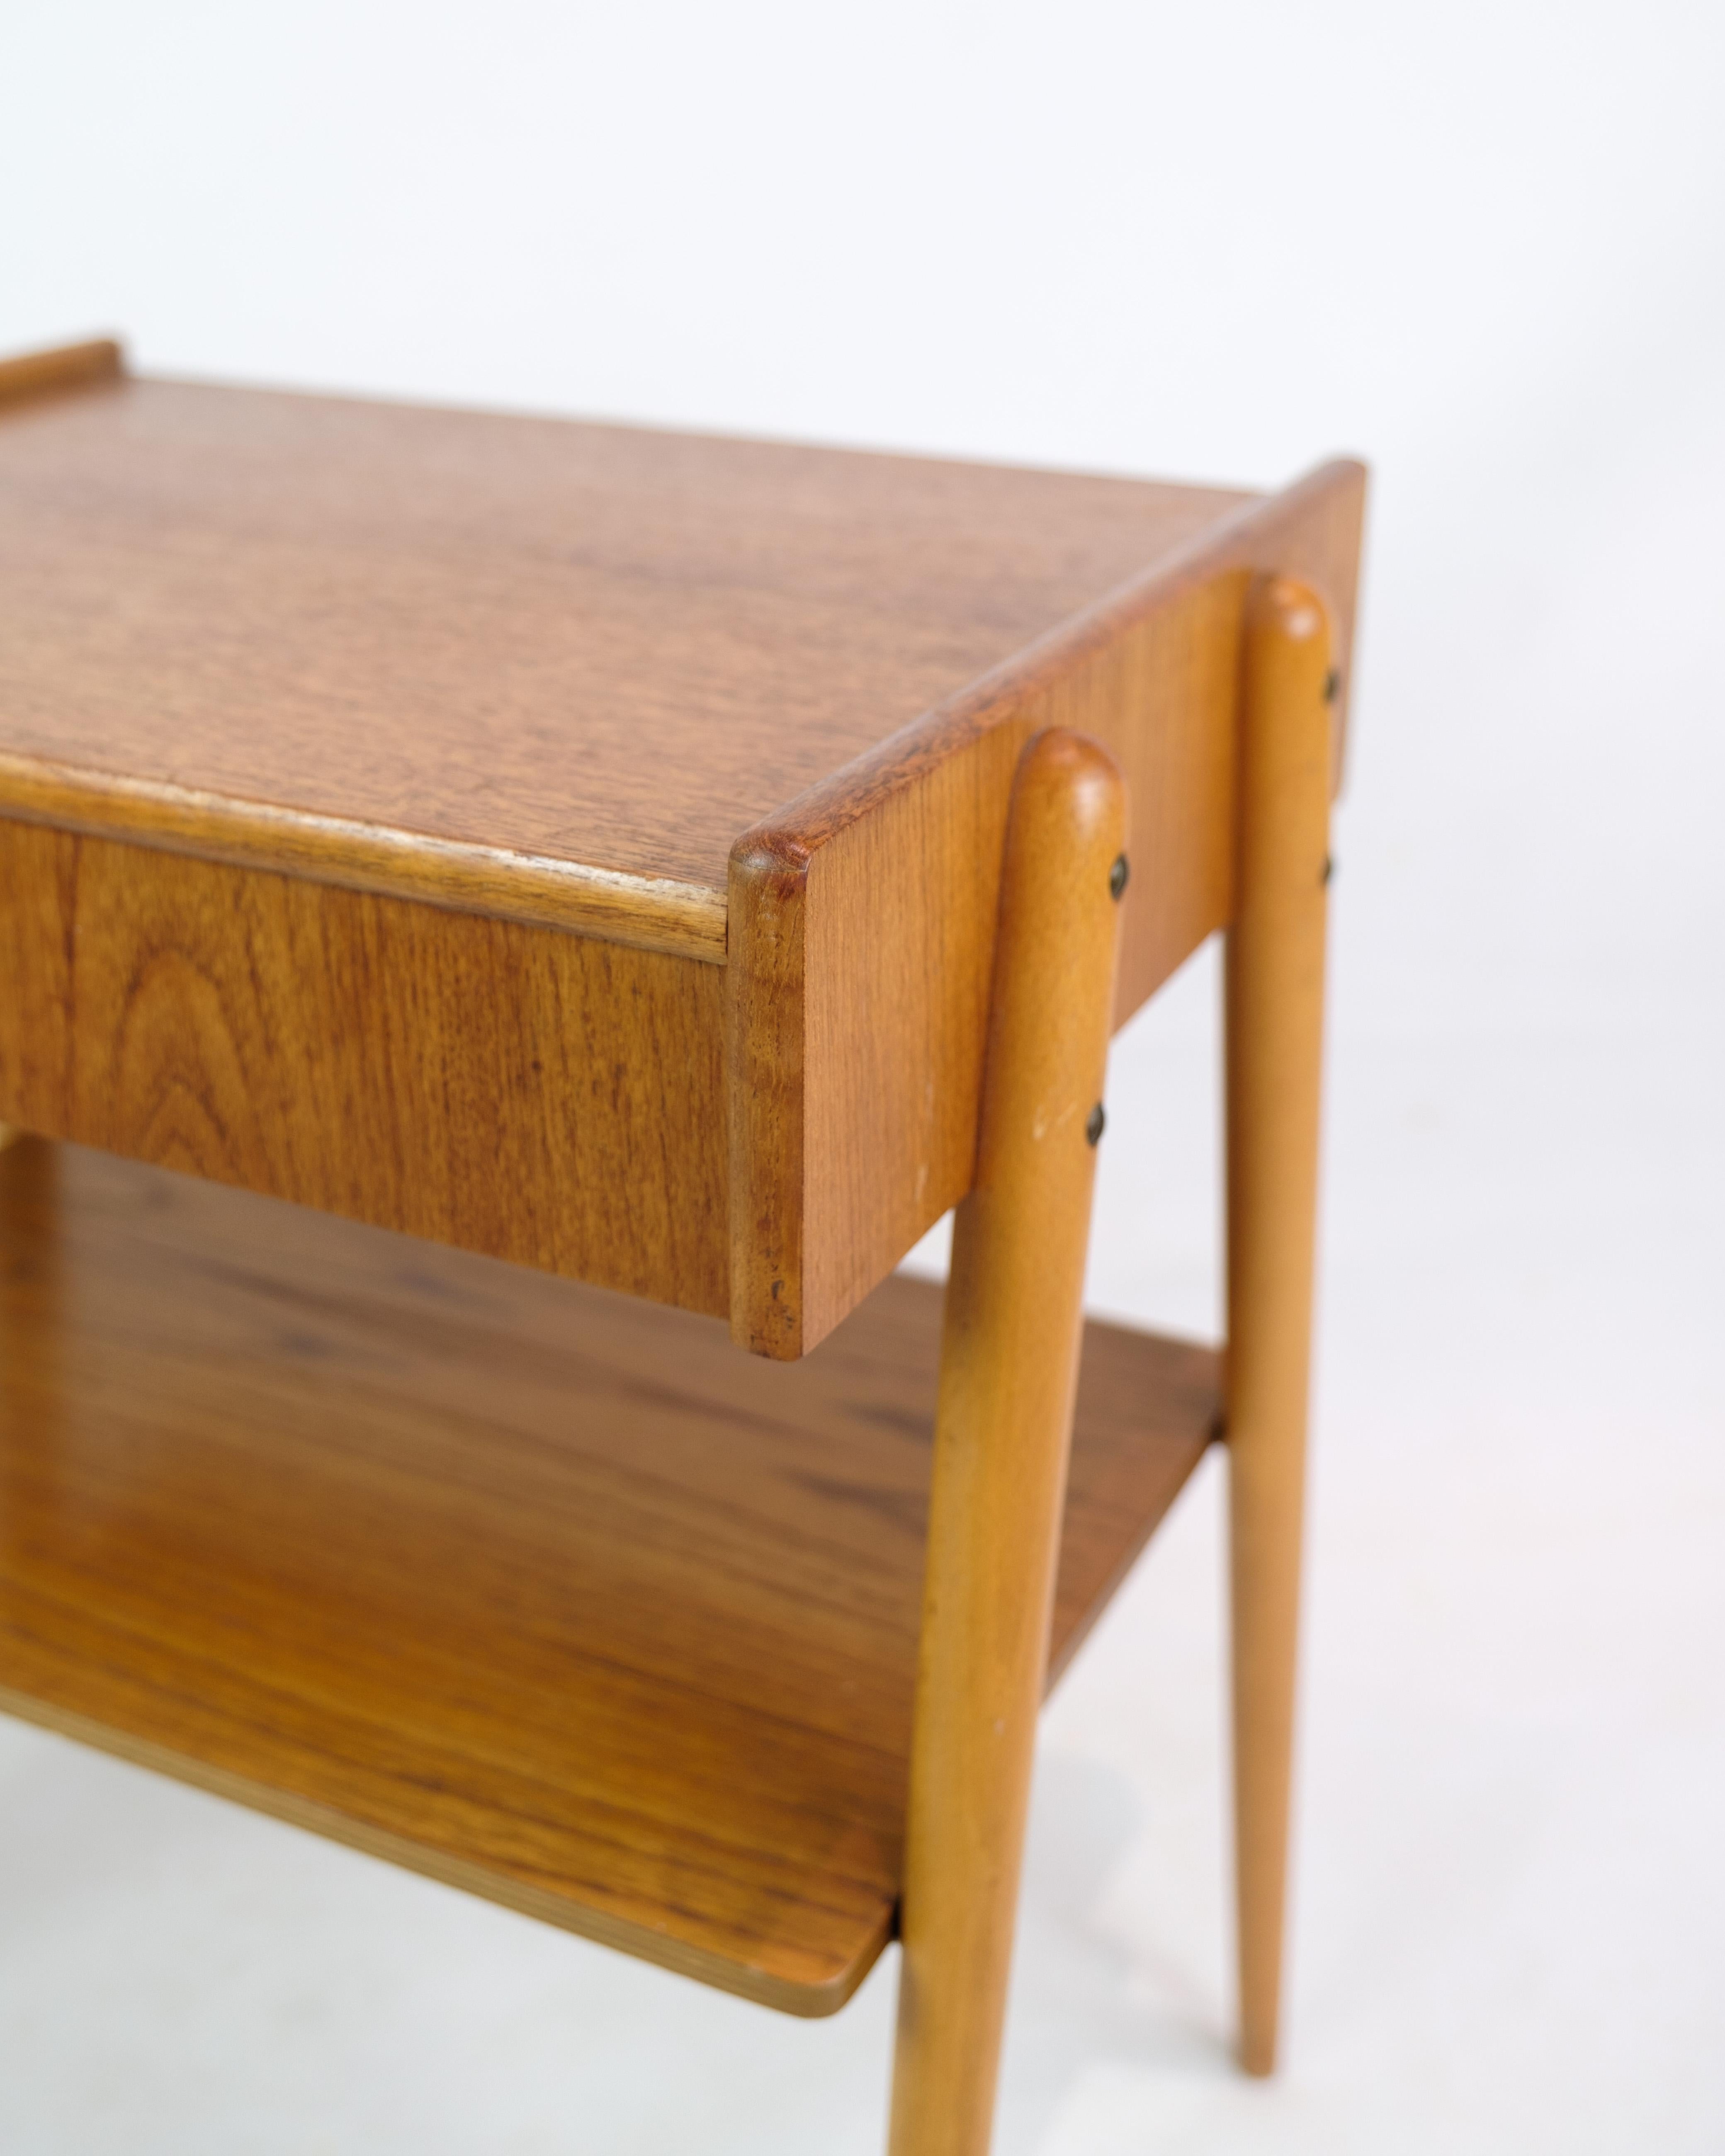 Mid-20th Century Set of Nightstands In Teak, By AB Carlström & Co Furniture Factory From 1950s For Sale